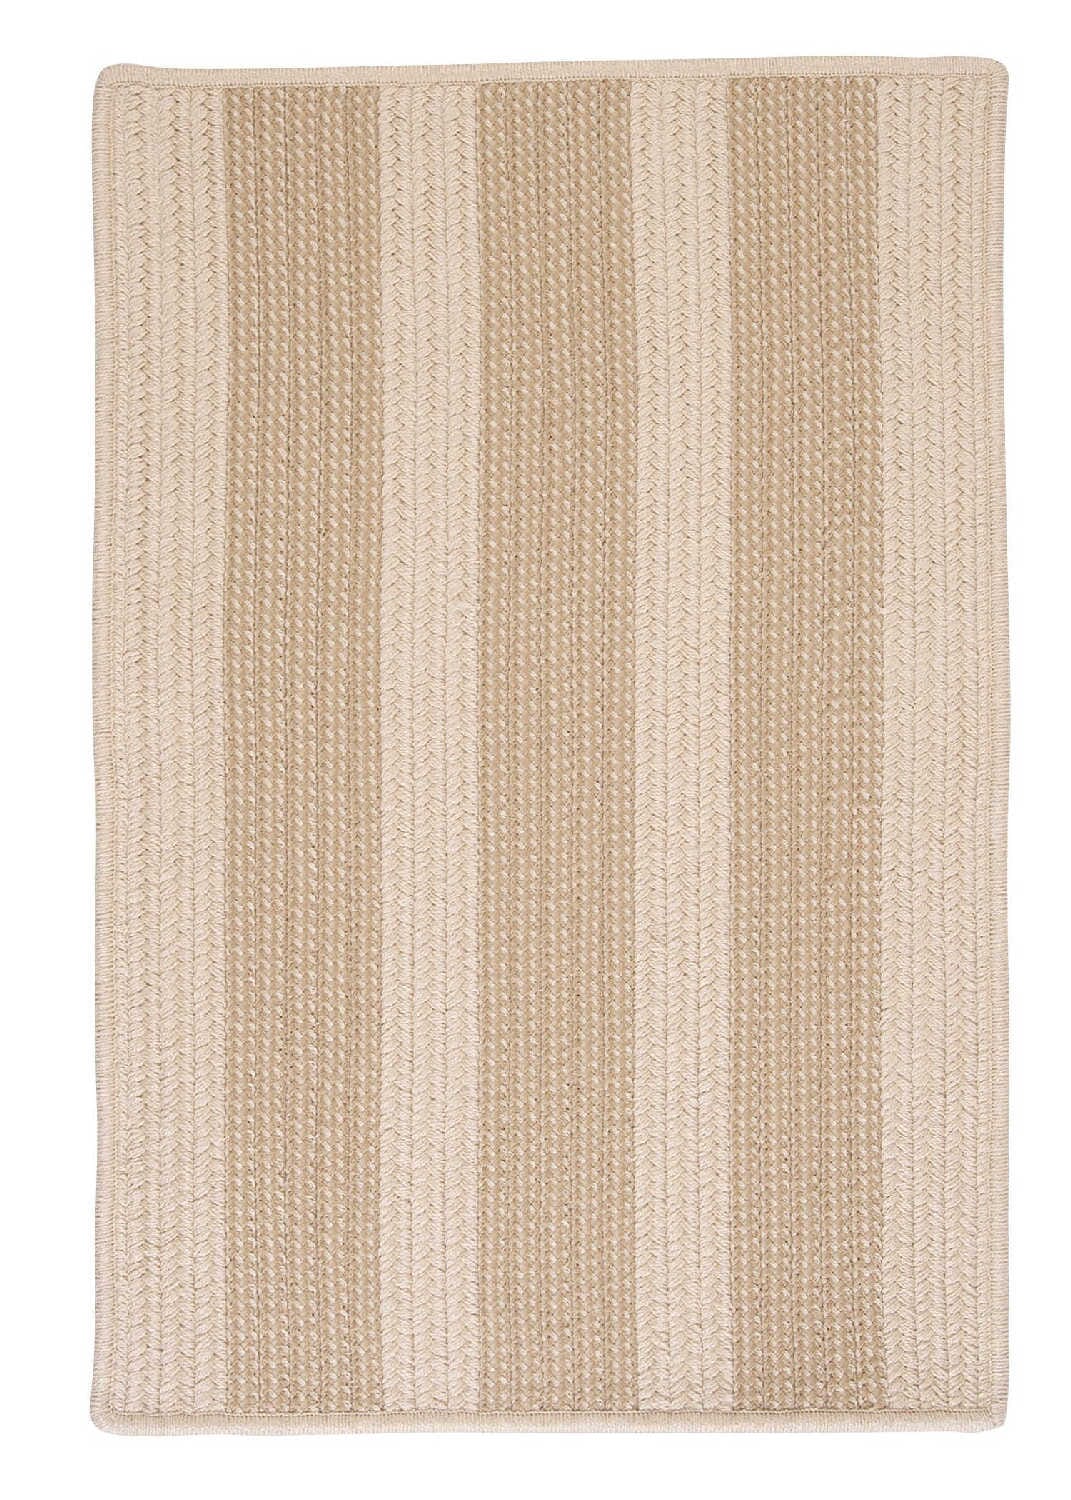 Colonial Mills Boat House Bt99 Natural / Neutral Striped Area Rug